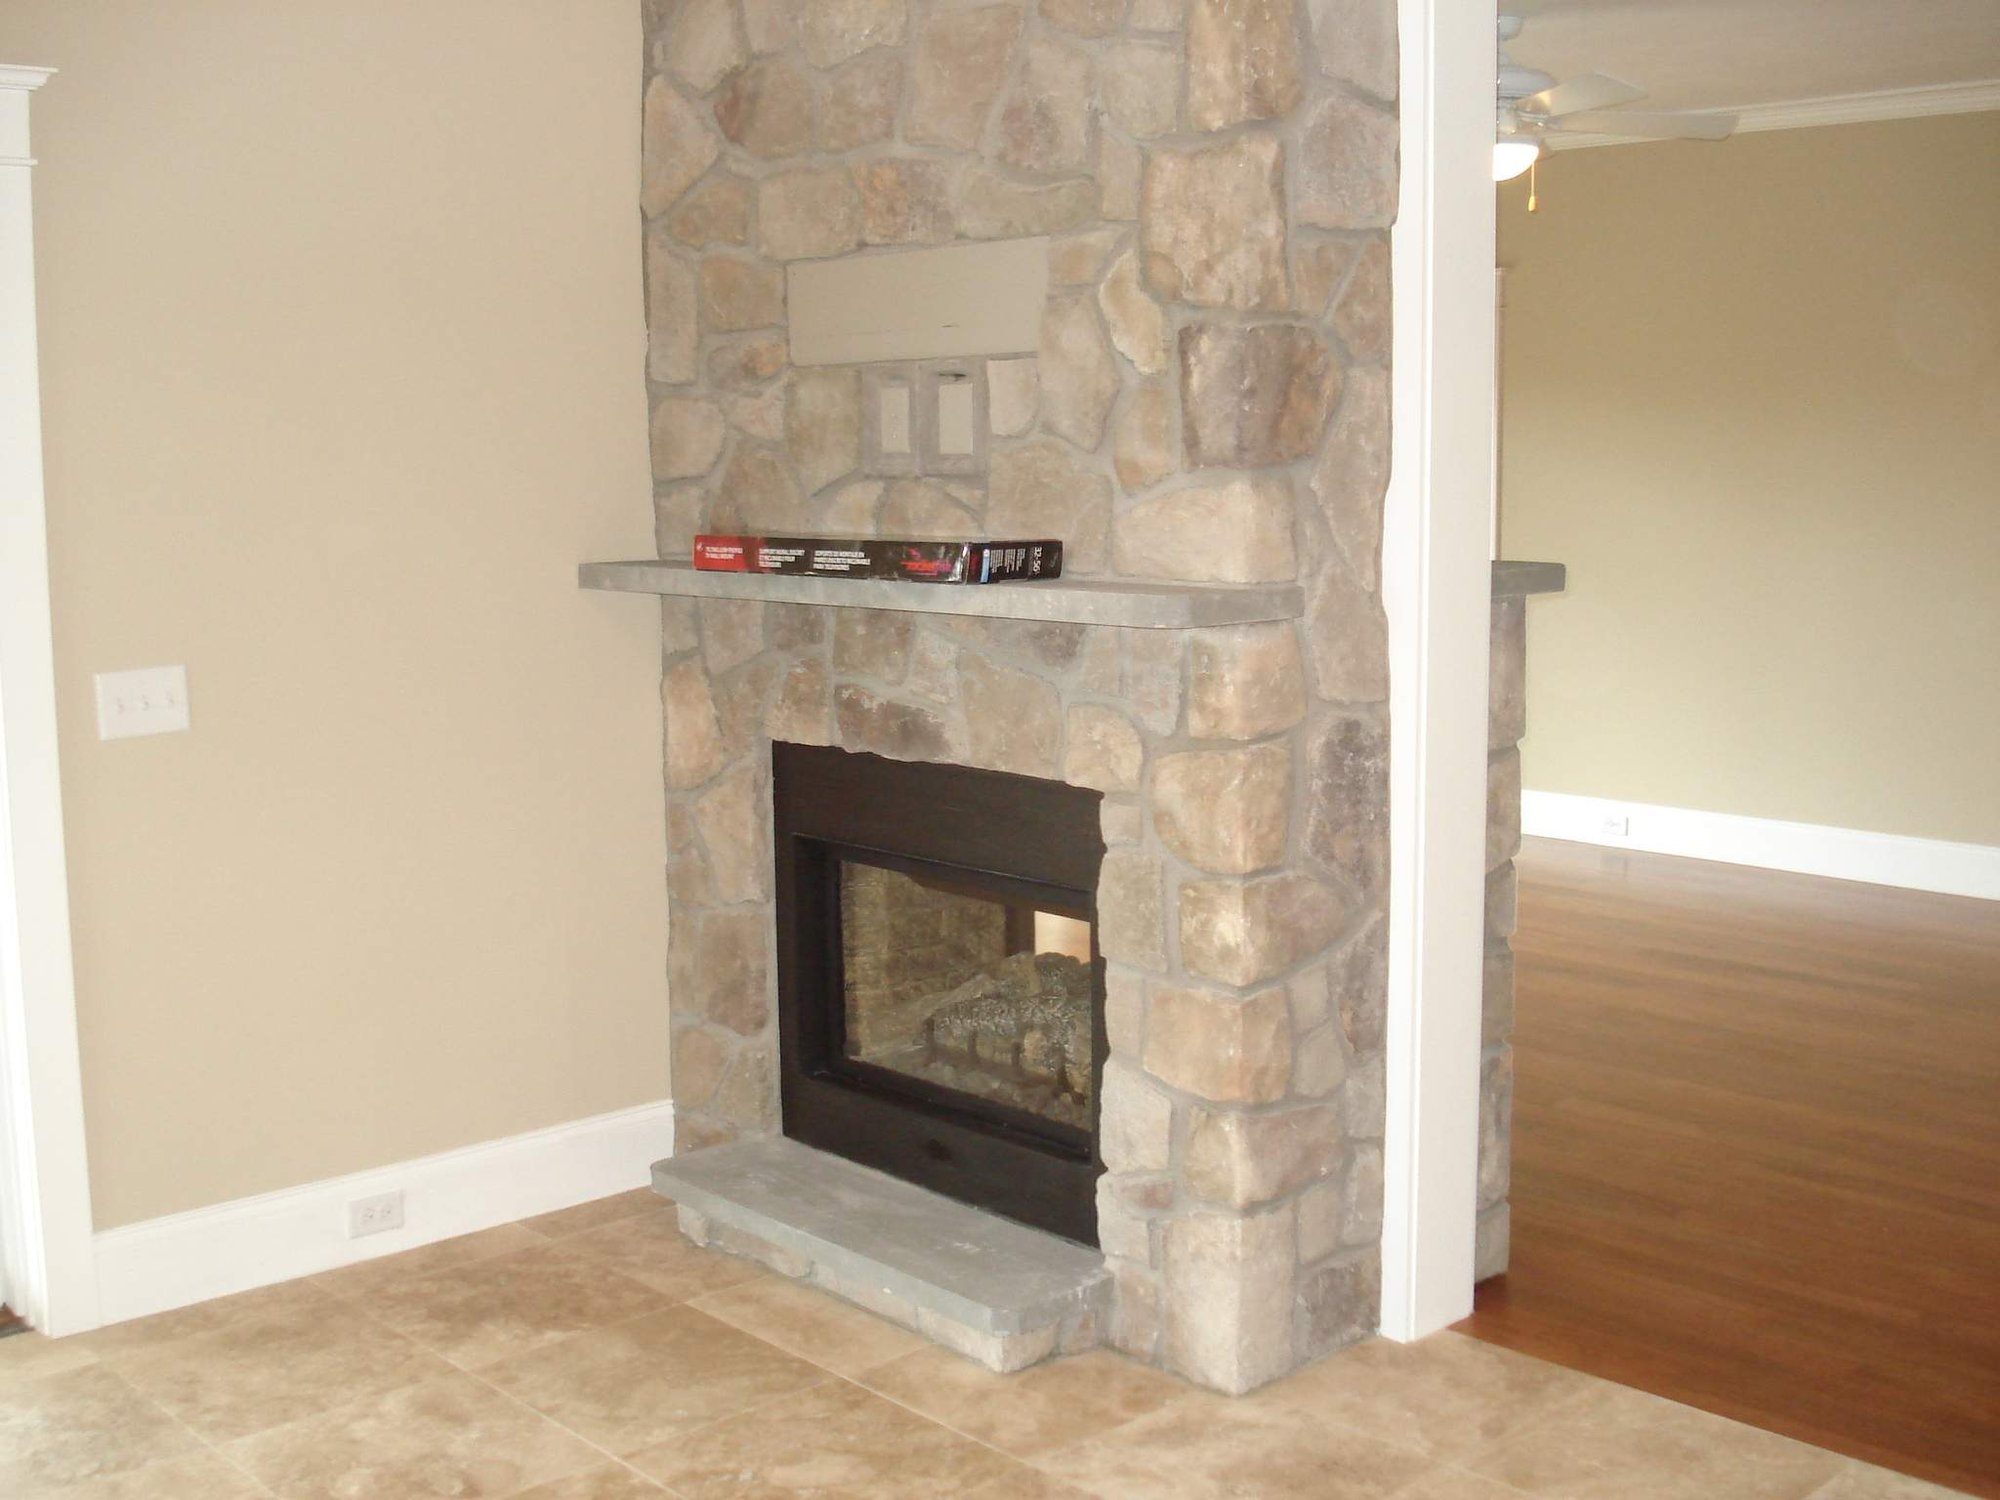 Photo of Room Divide Fireplace - Pre